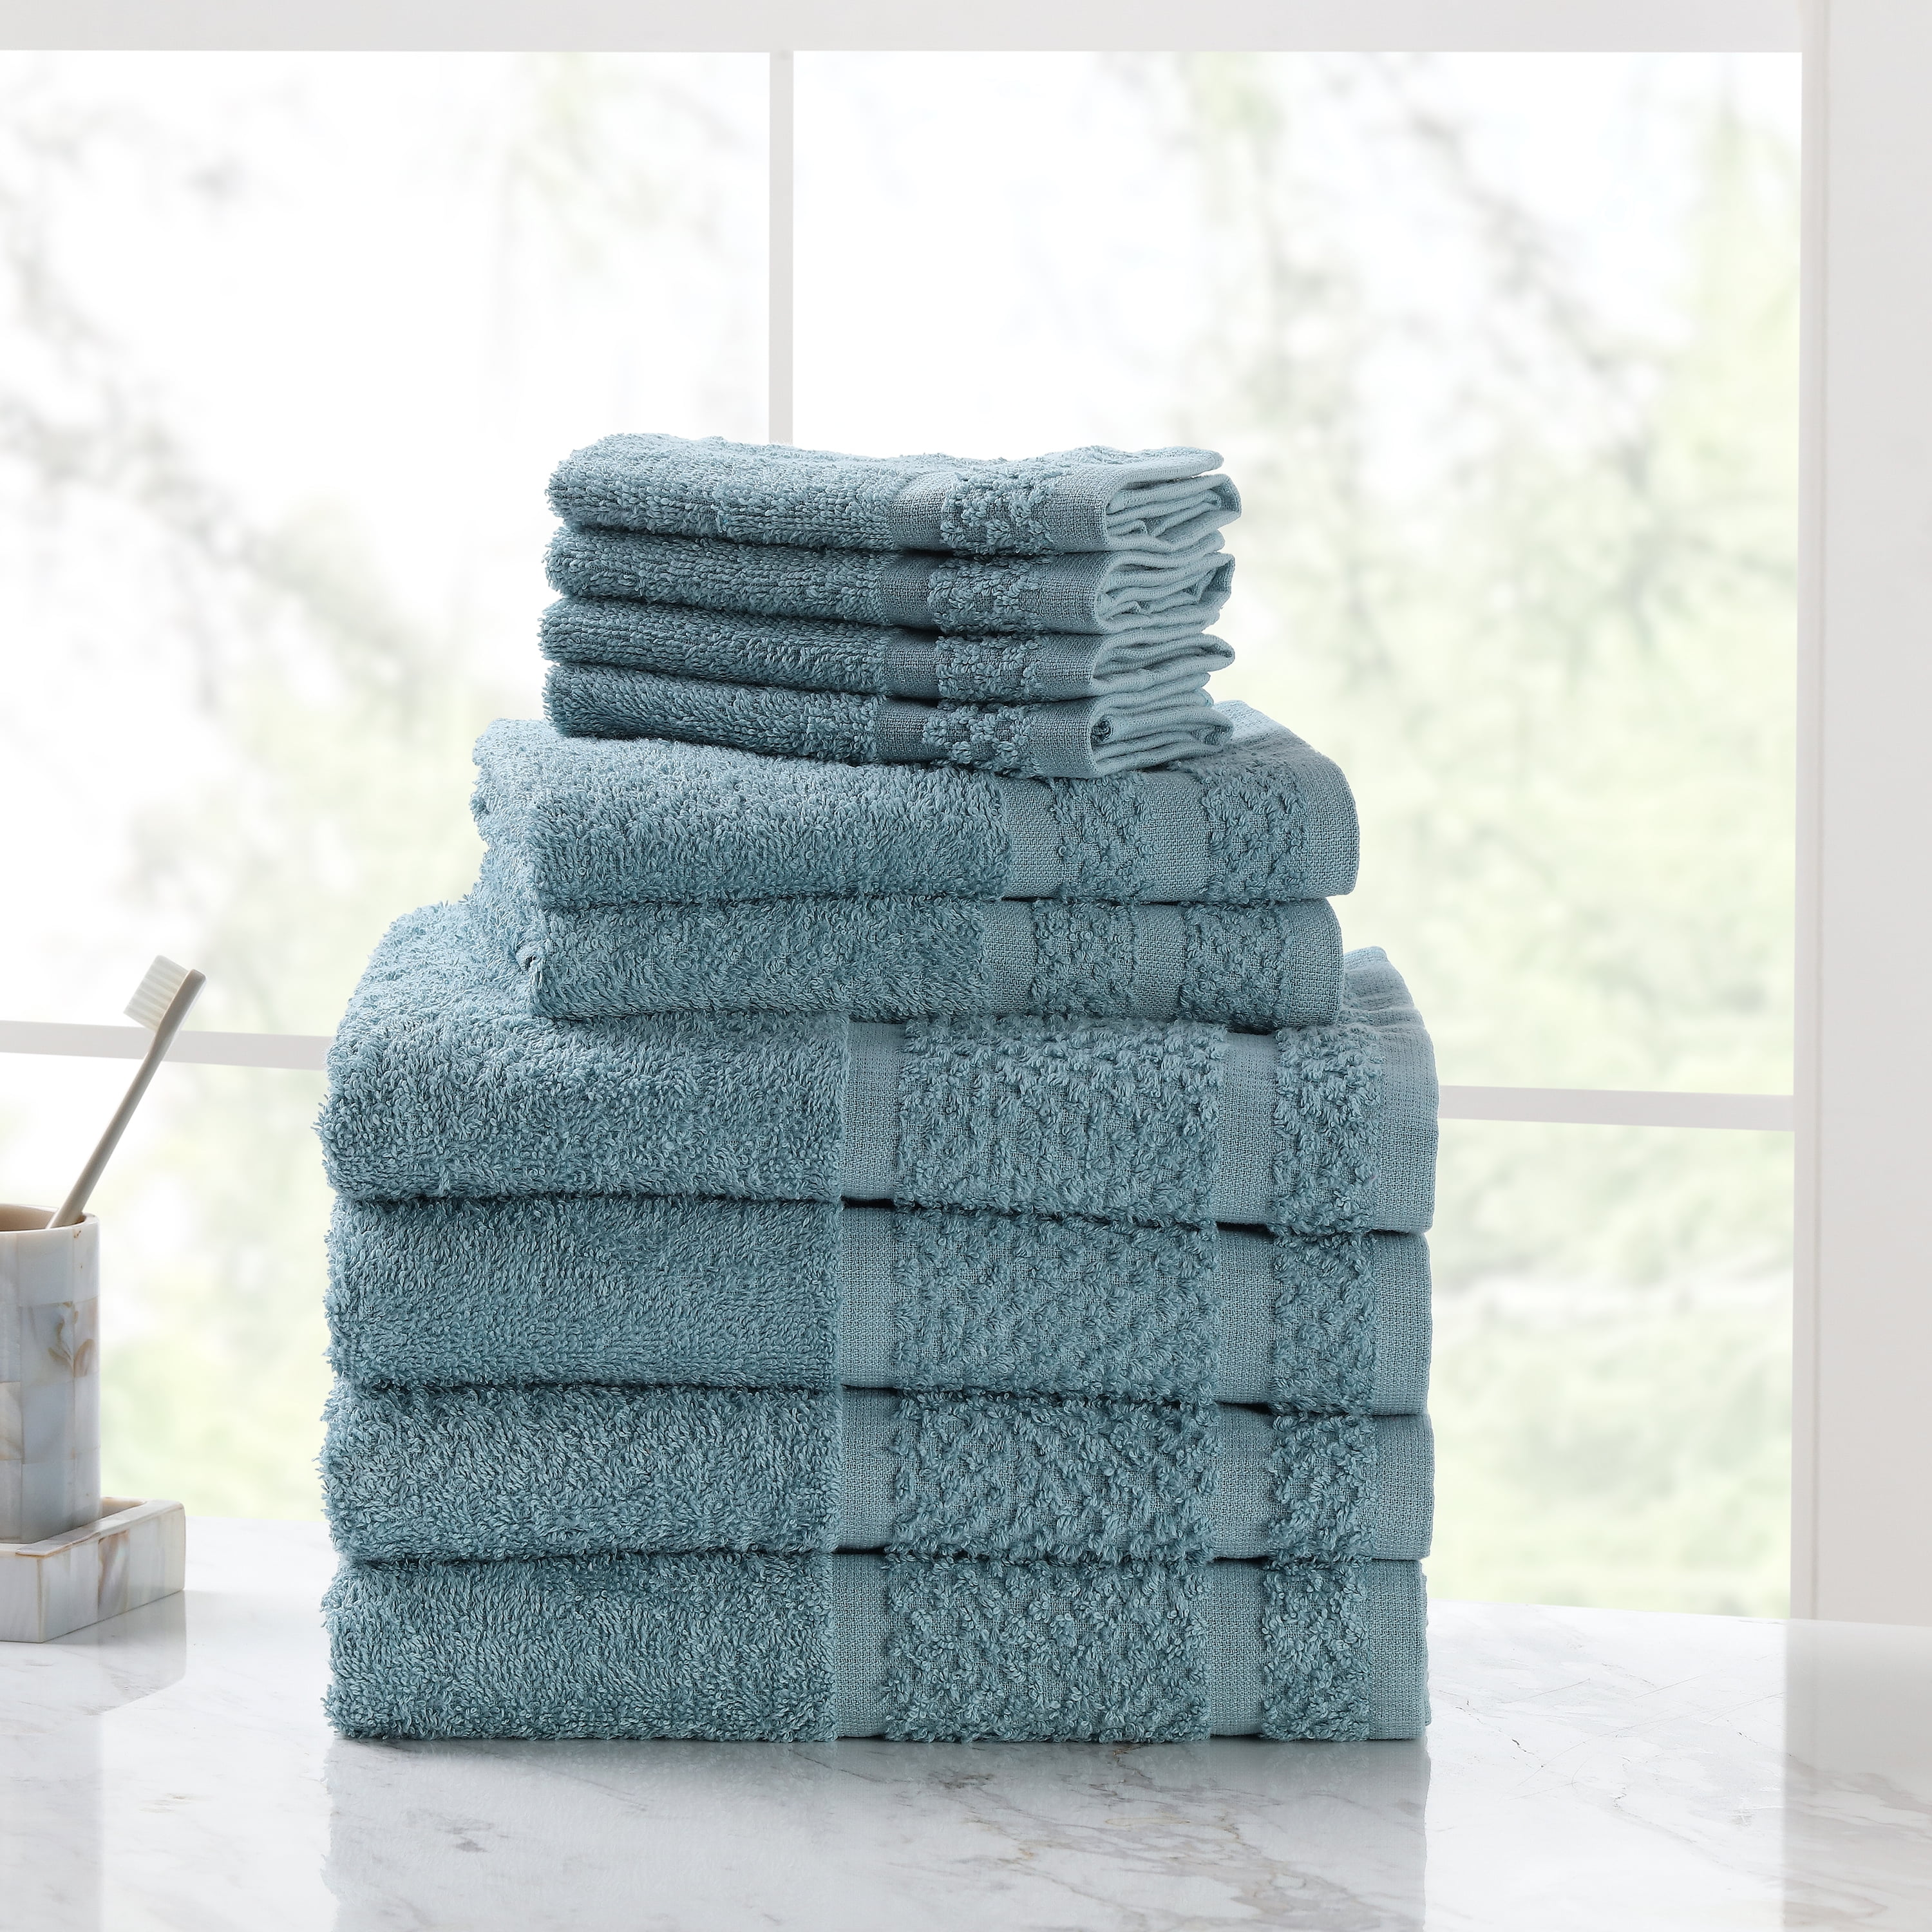 Face and Body Towels quality blend with softness and durability. Shop!